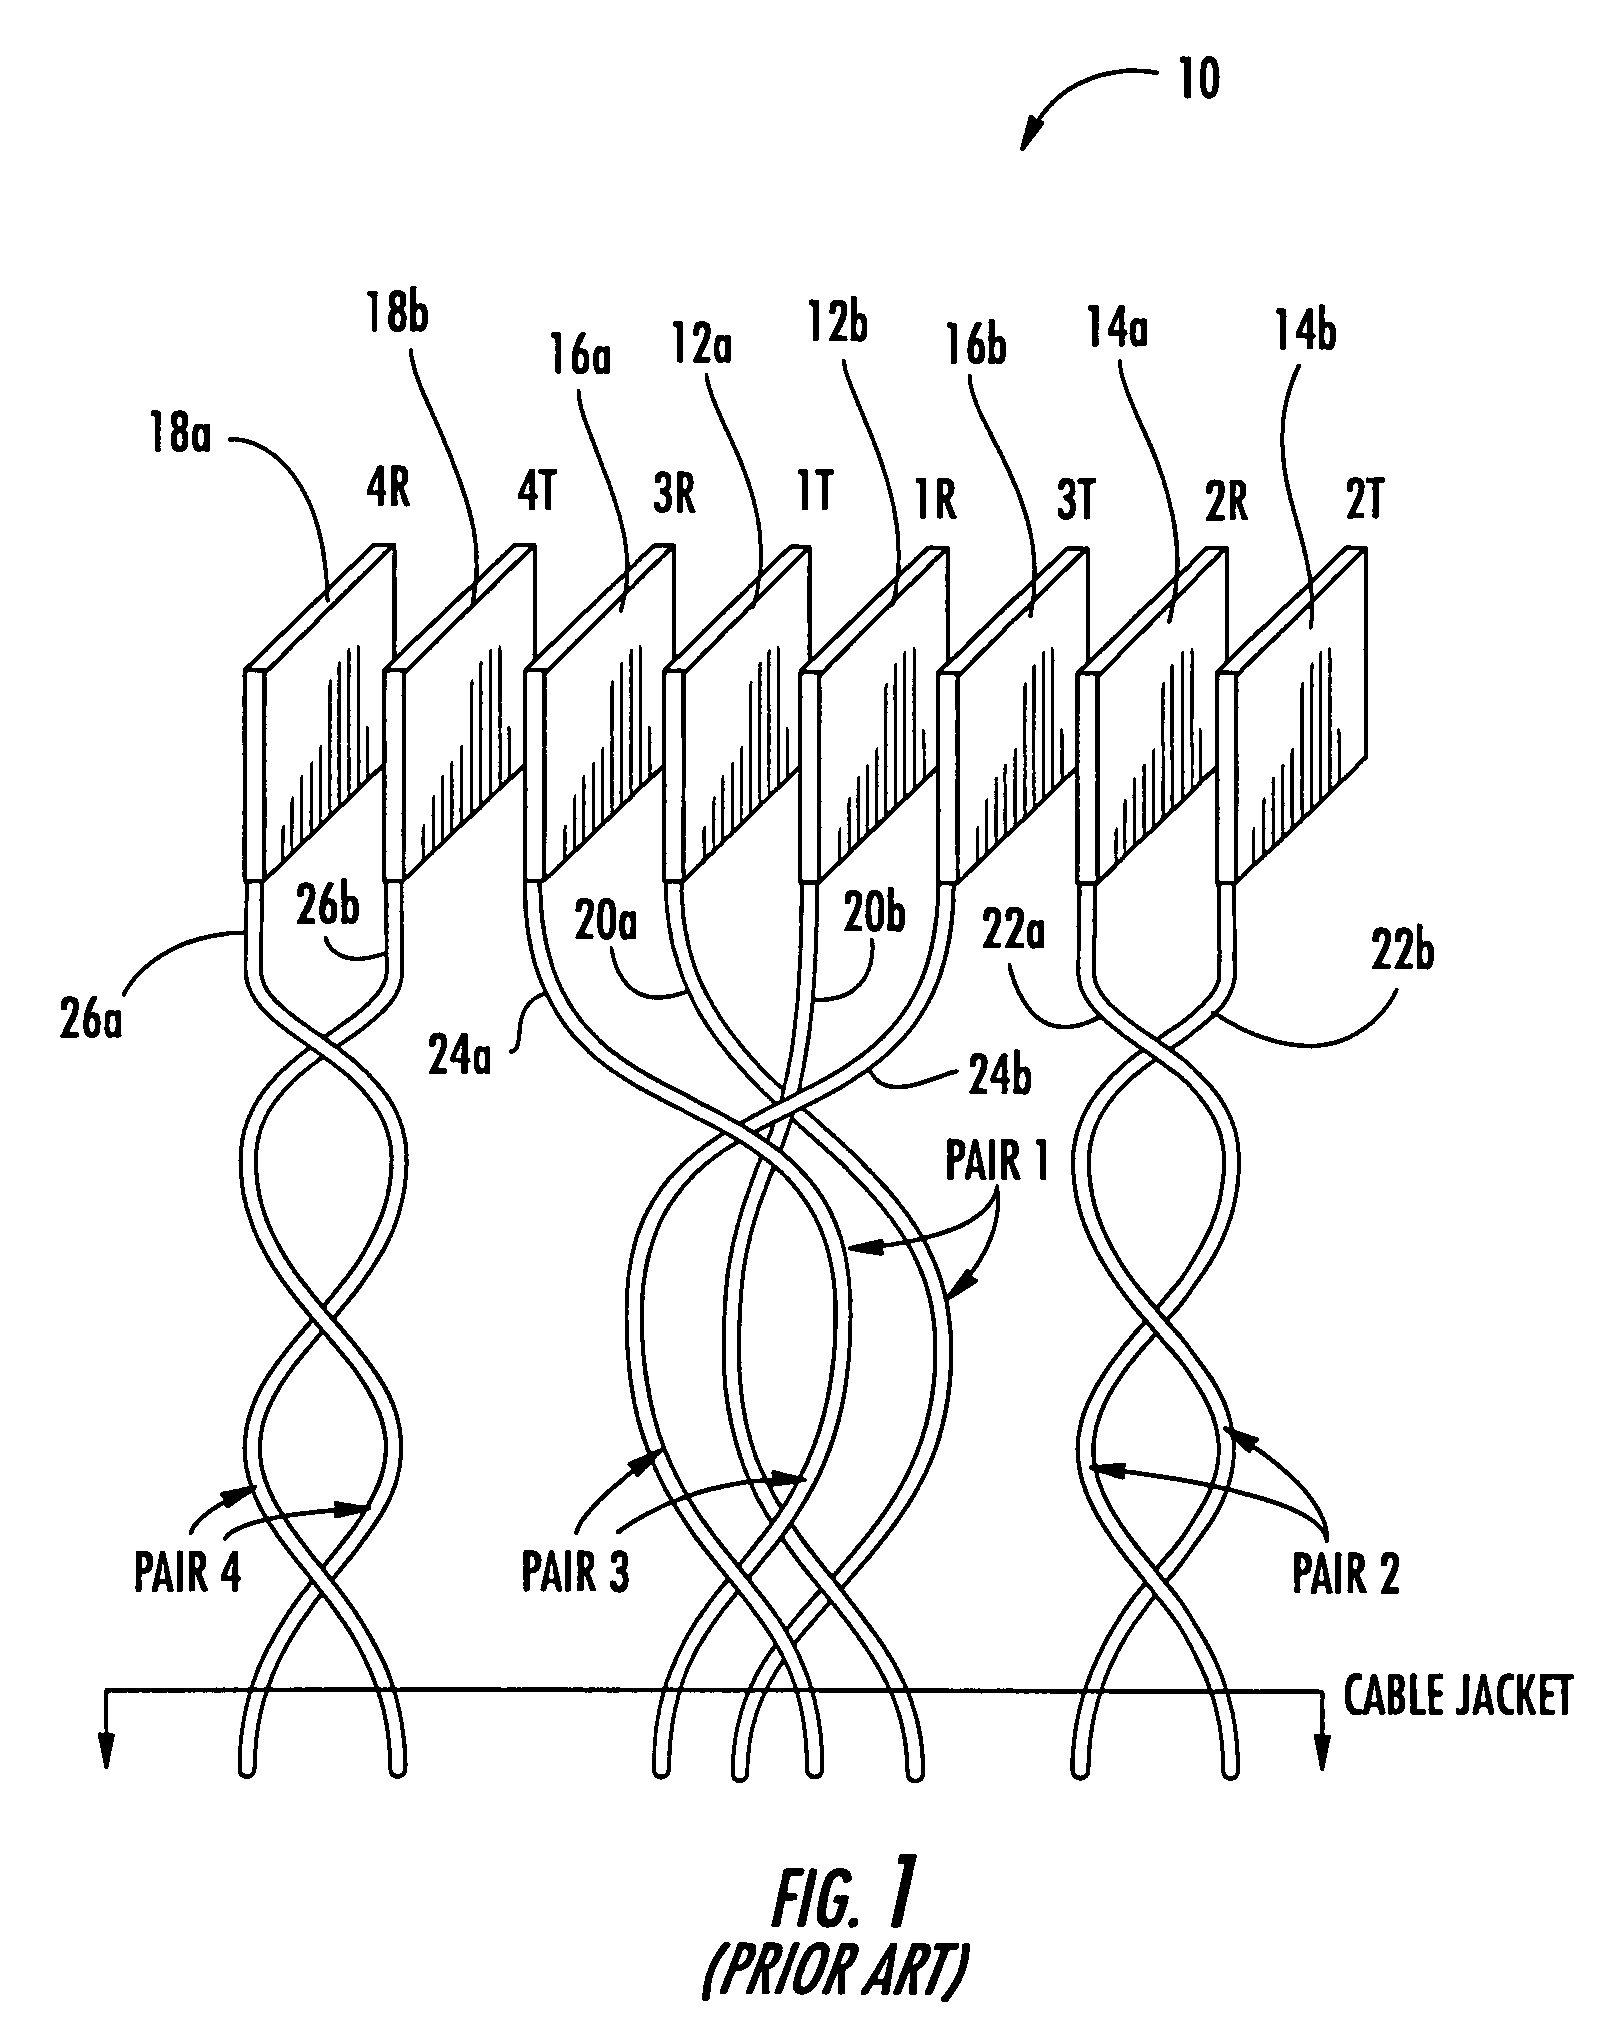 Communication plug with balanced wiring to reduce differential to common mode crosstalk